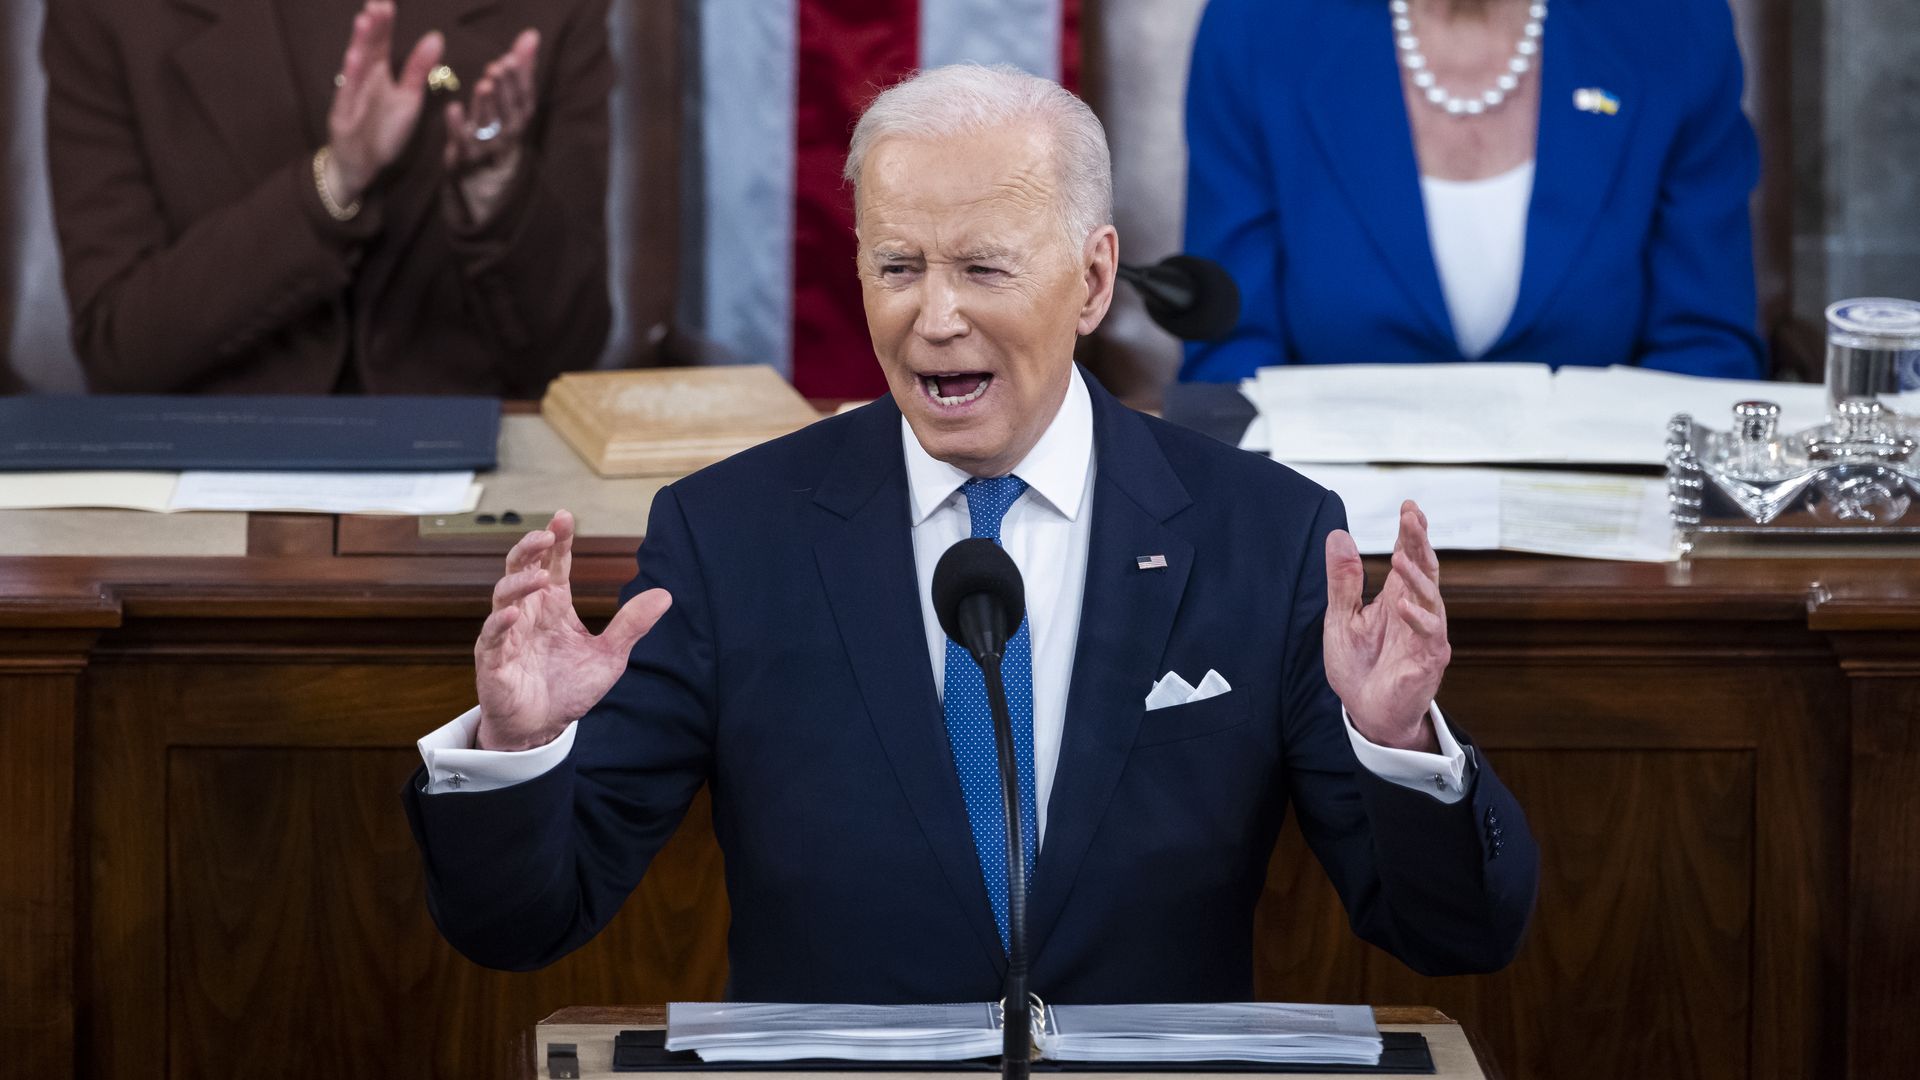 Picture of Biden giving his state of the union speech